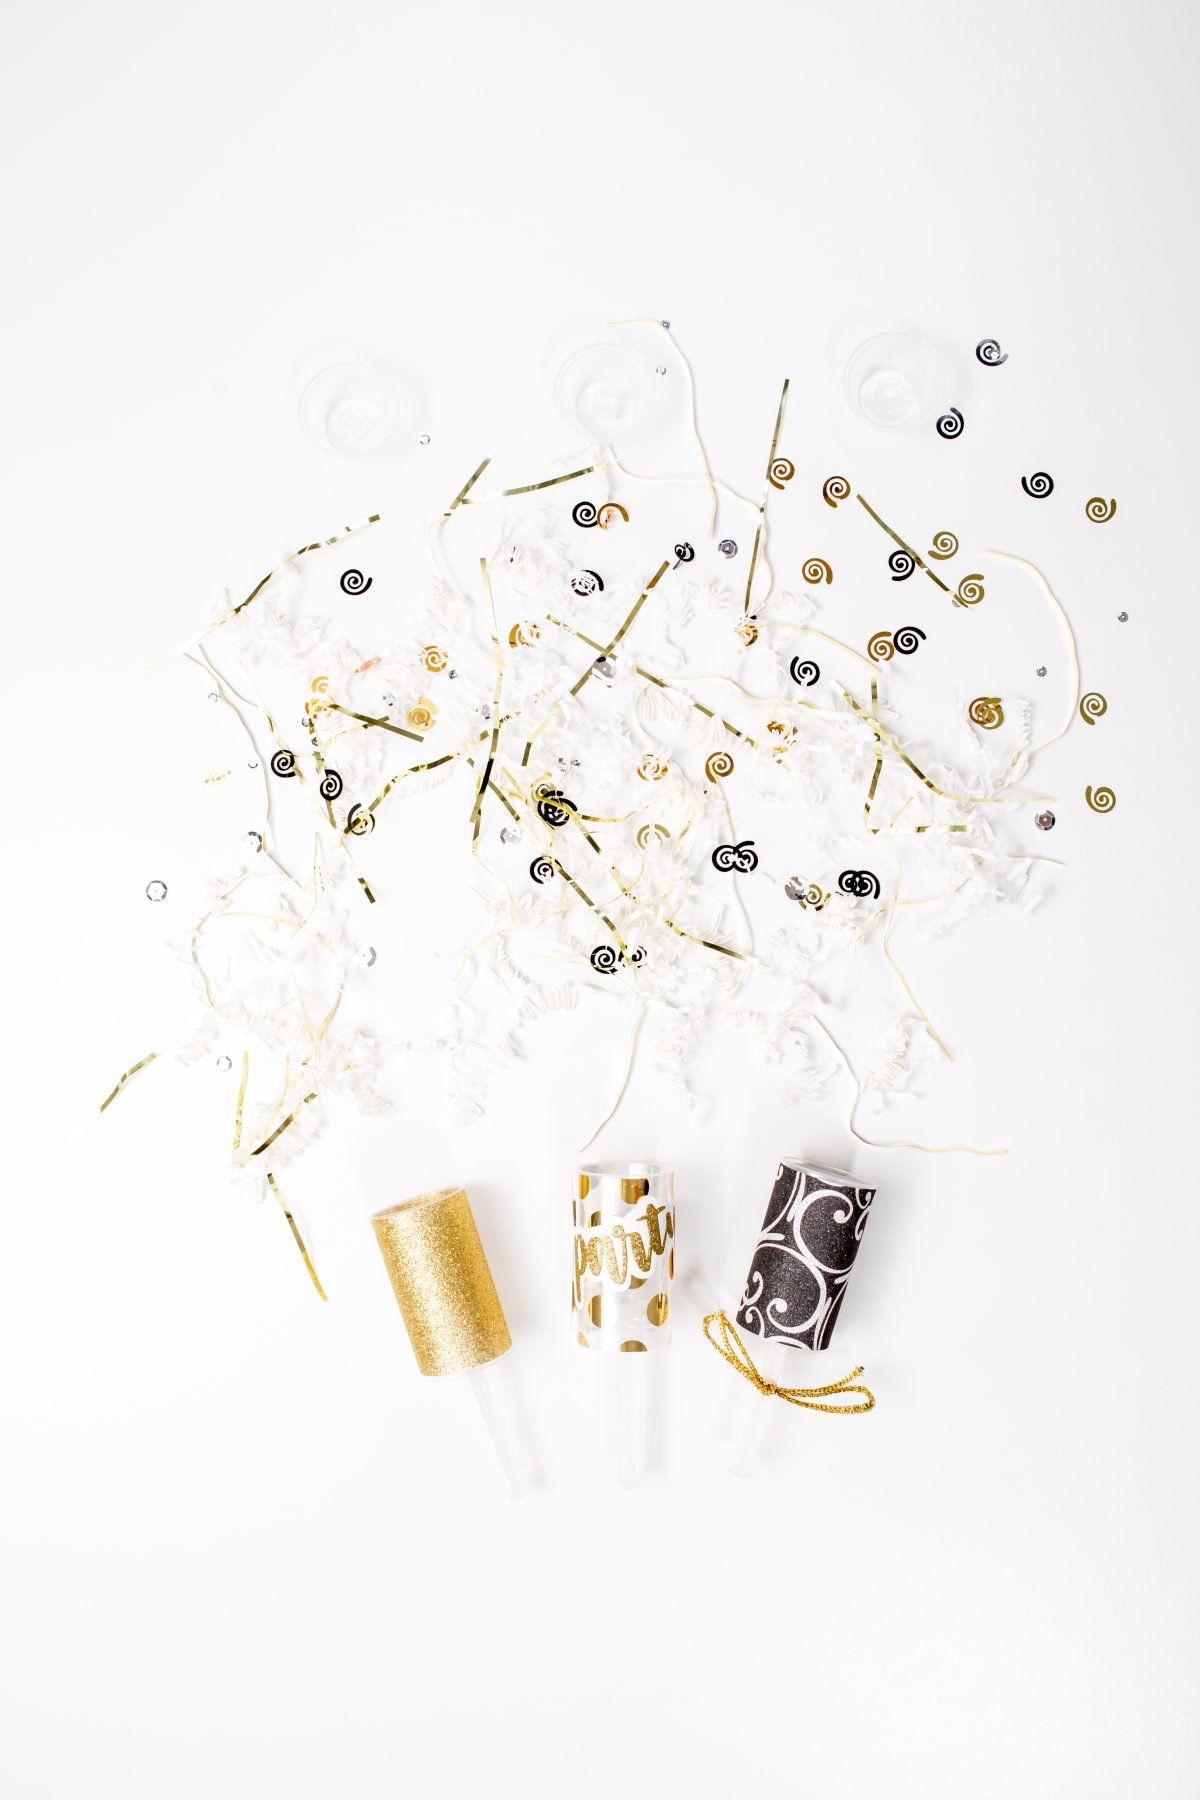 5D4B5122 - NYE Party Poppers